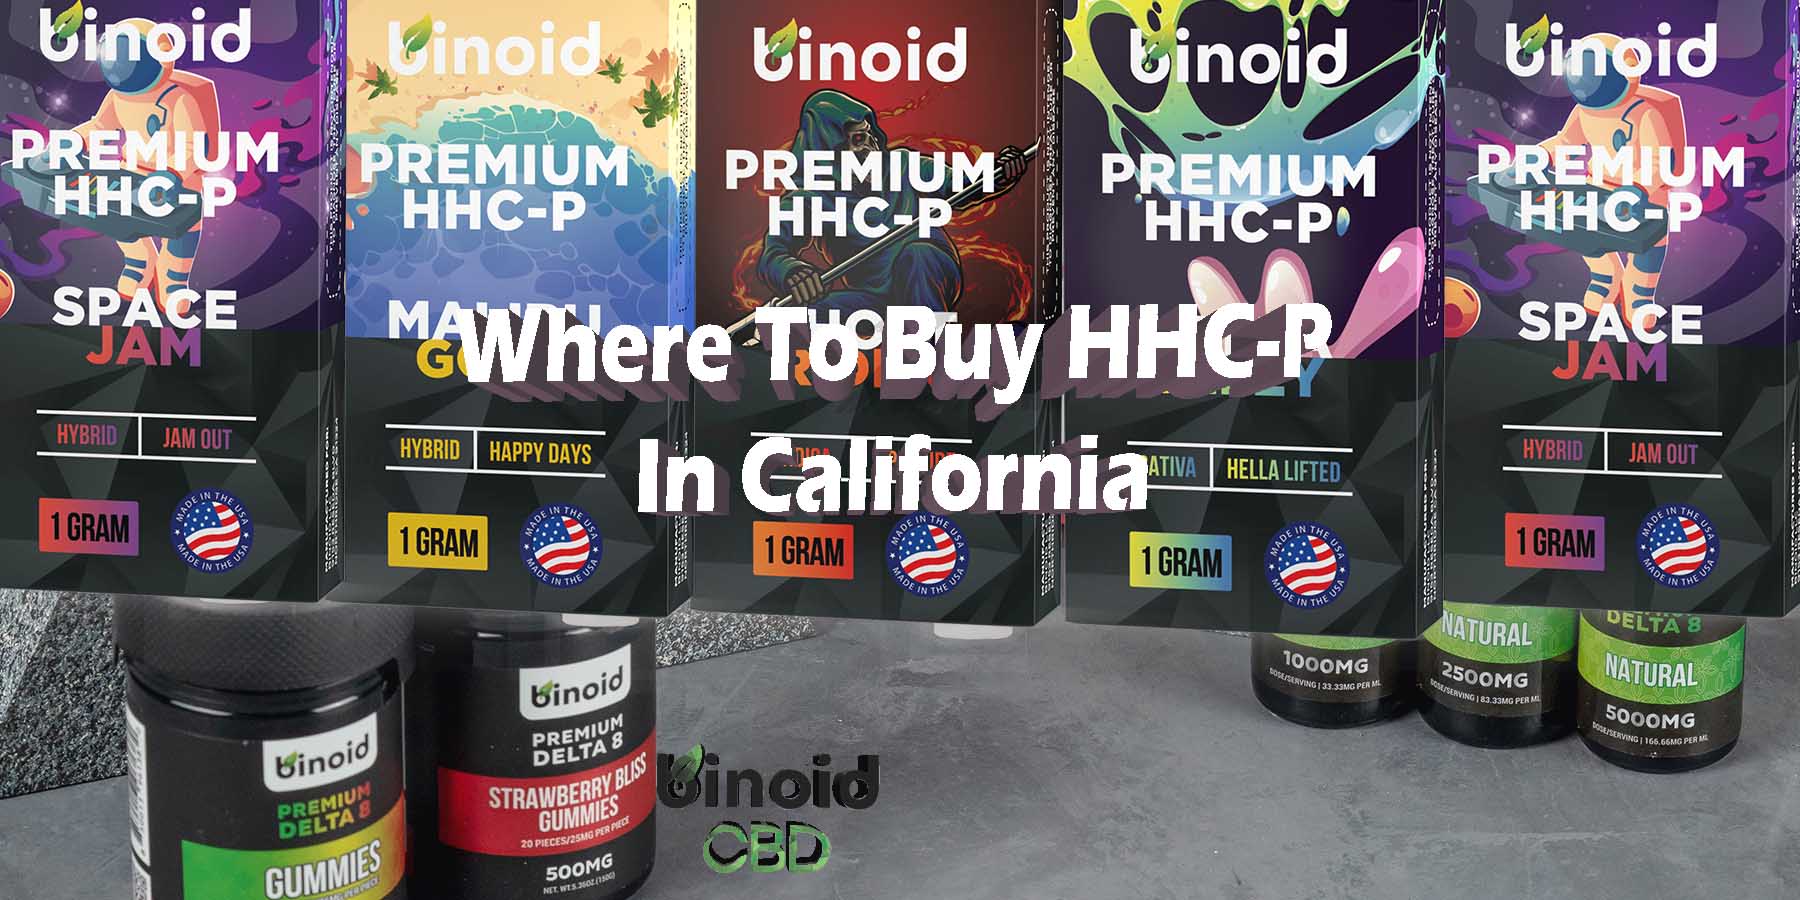 Where To Buy HHC-P In California Brands Best Disposable Cartridges Vape 2 Gram Review Take Work Online Best Brand Price Get Near Me Lowest Coupon Discount Store Shop Vapes Carts On